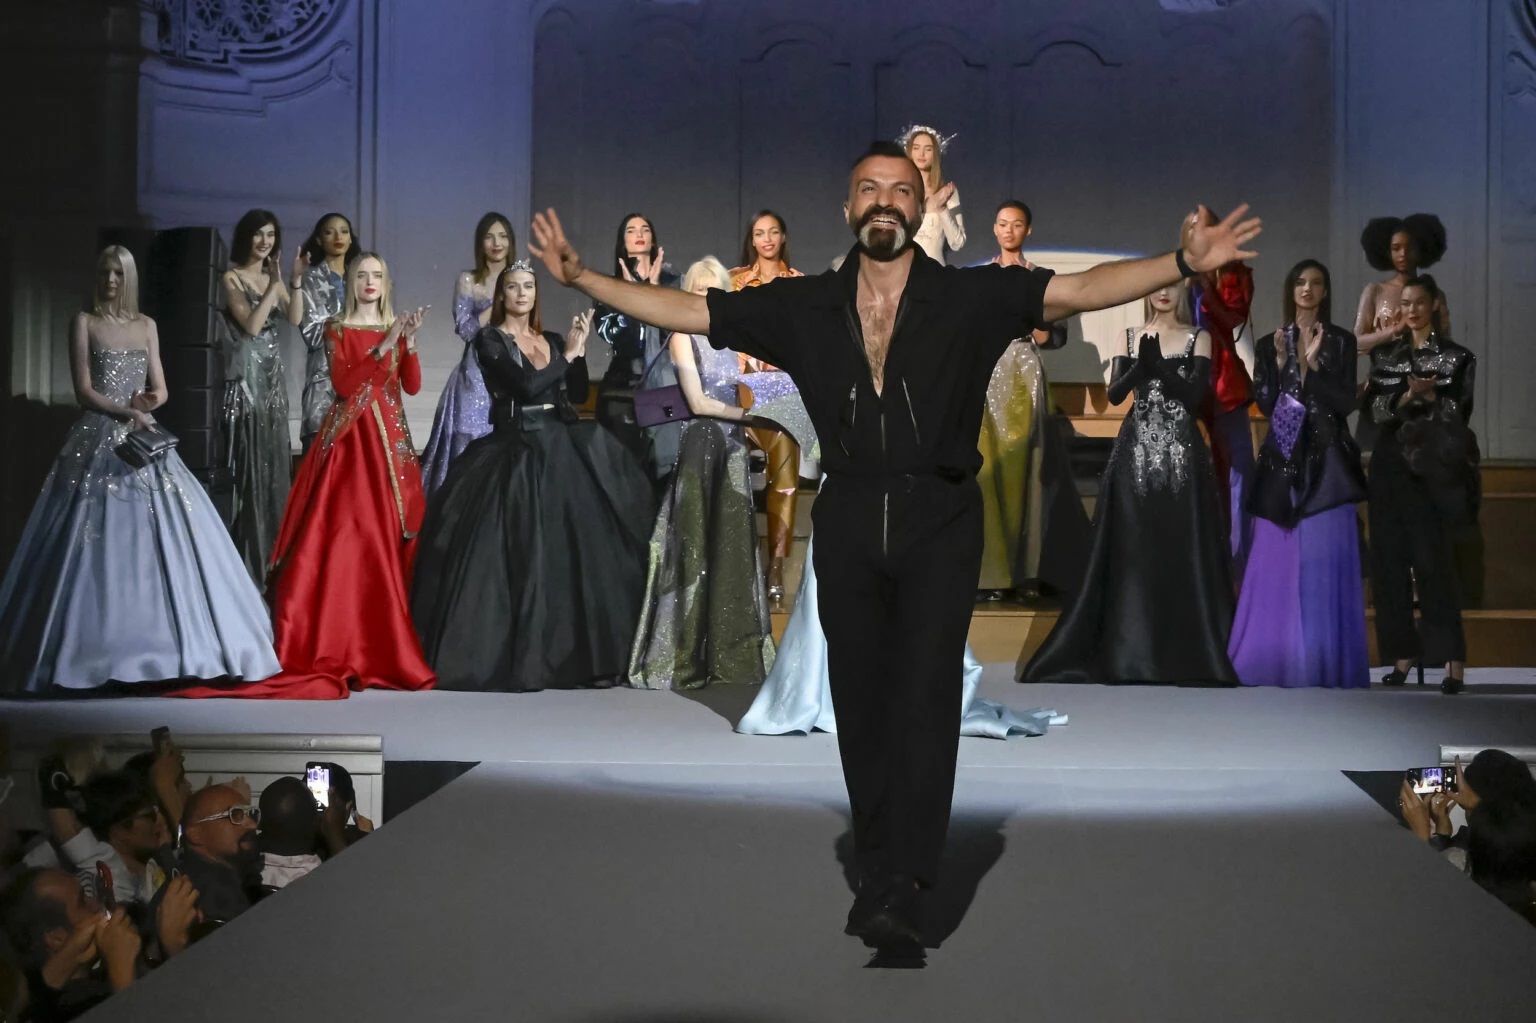 first-shield-haute-couture-collection-final-1536x1023.jpg